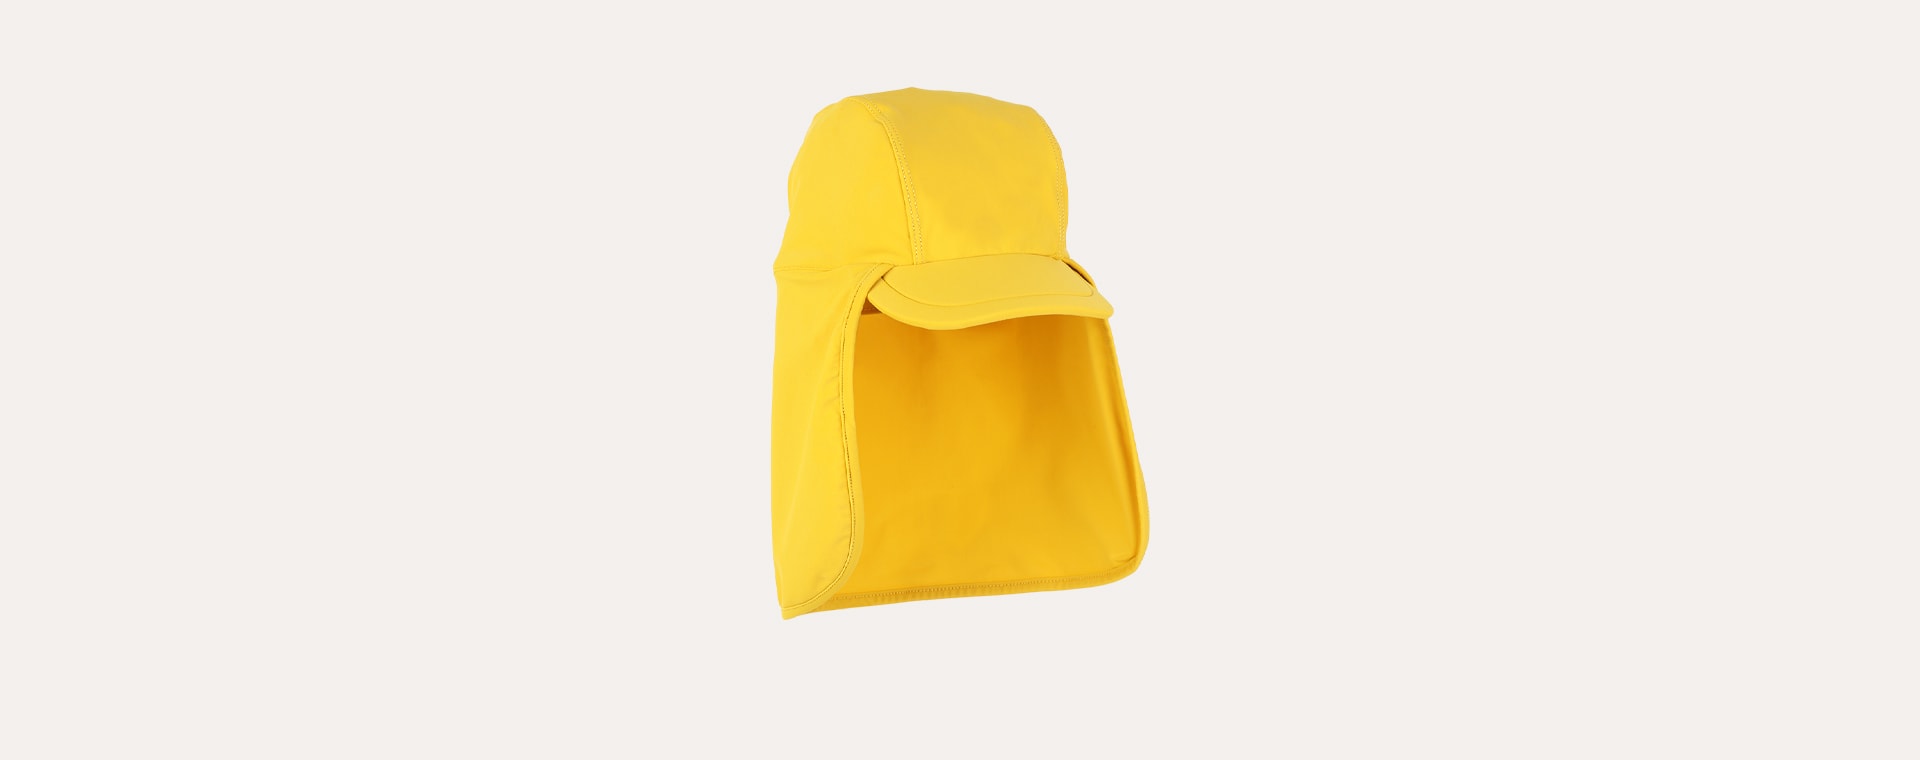 Mustard KIDLY Label Recycled Sun Hat